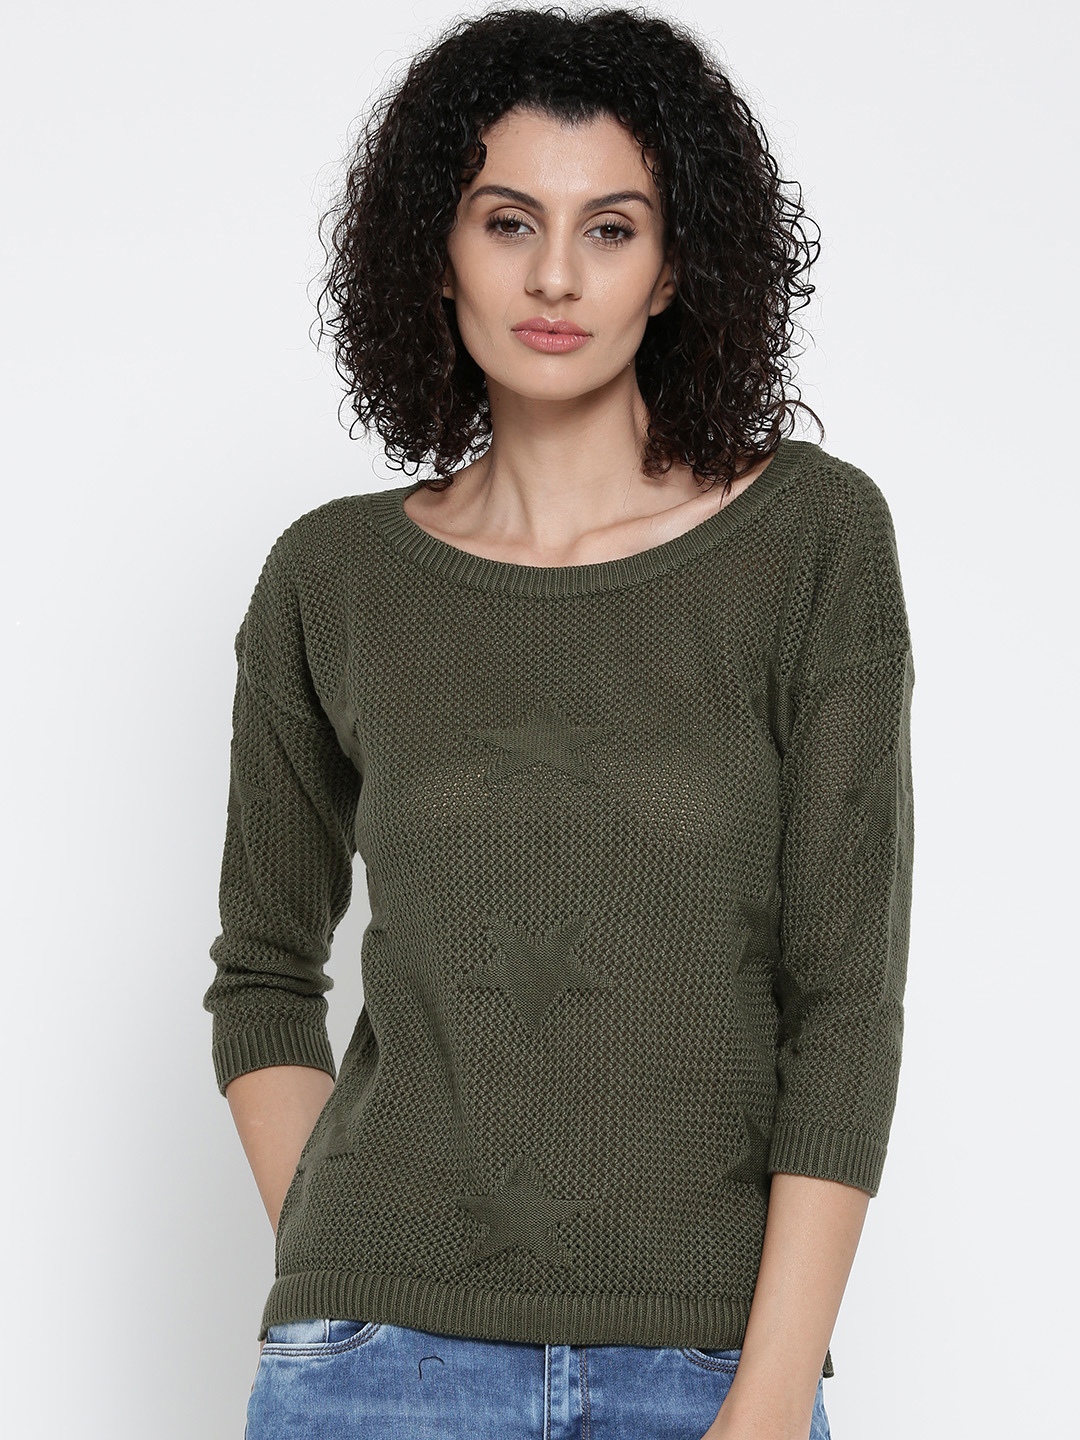 ONLY Women Olive Green Star Pattern Sweater ONLY Sweaters price Myntra ...